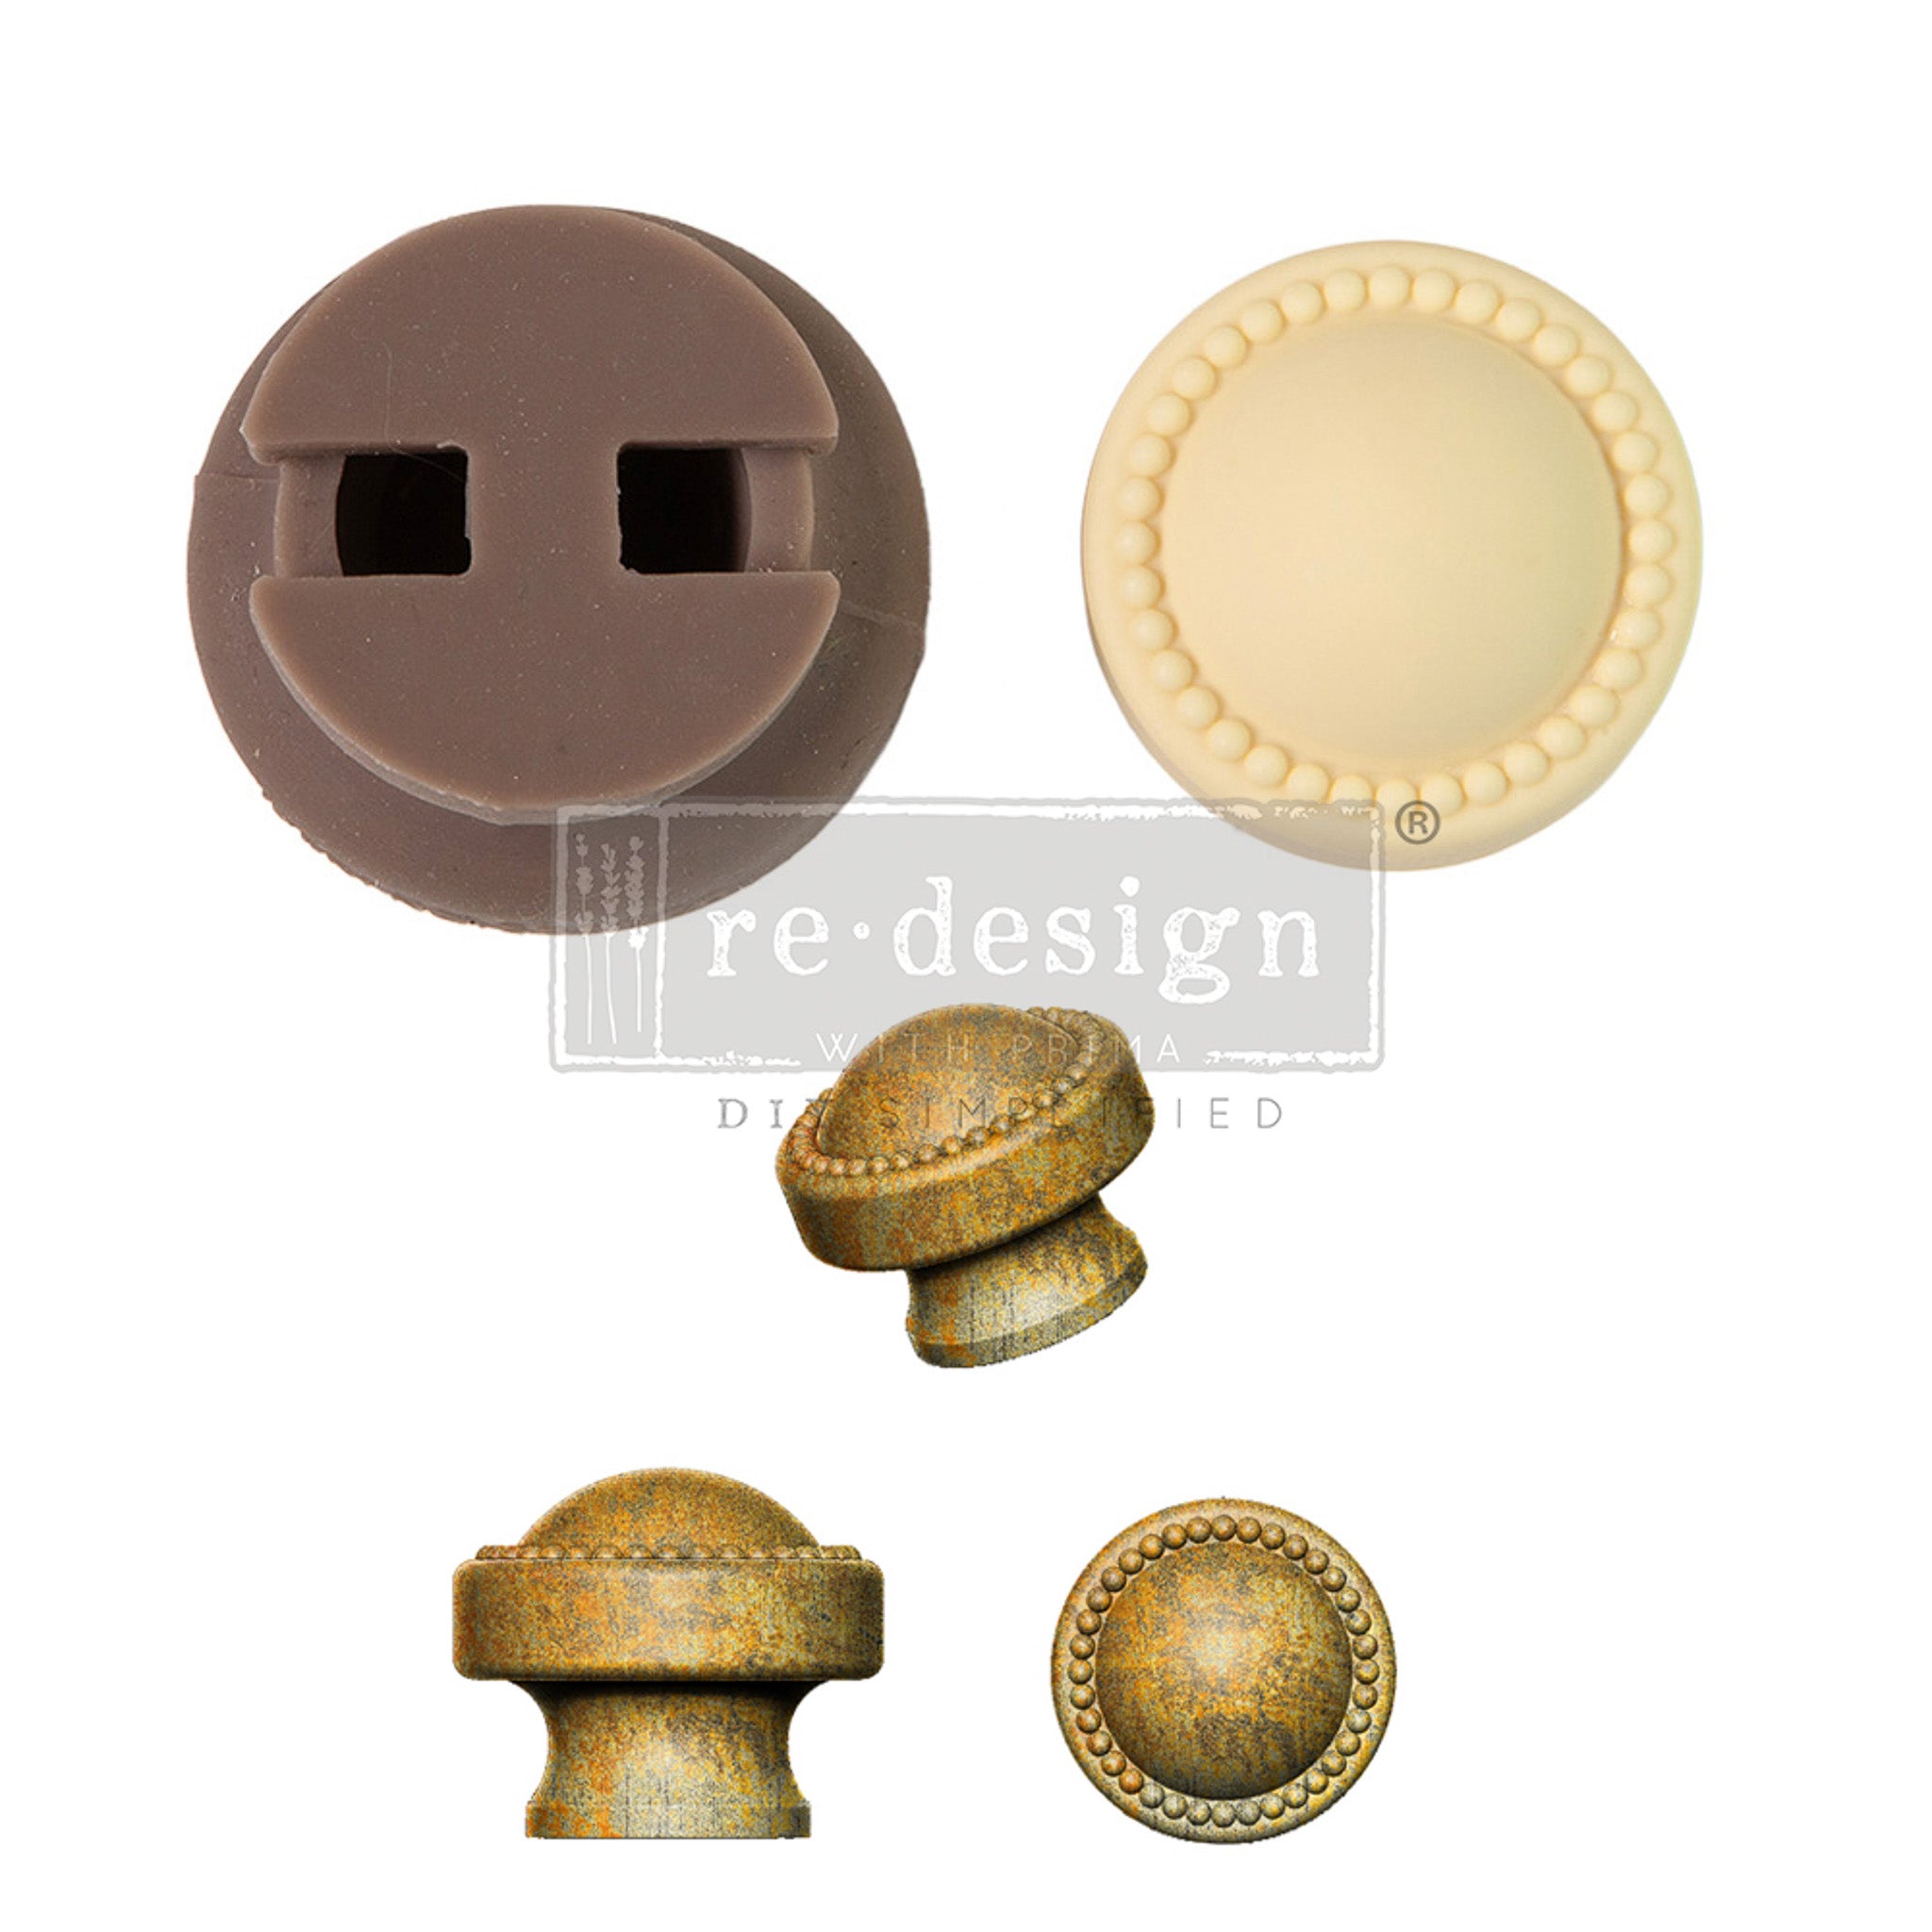 A brown silicone mould, cream-colored resin casting, and 3 views of gold-colored castings of a round drawer knob with a pearl border are against a white background.